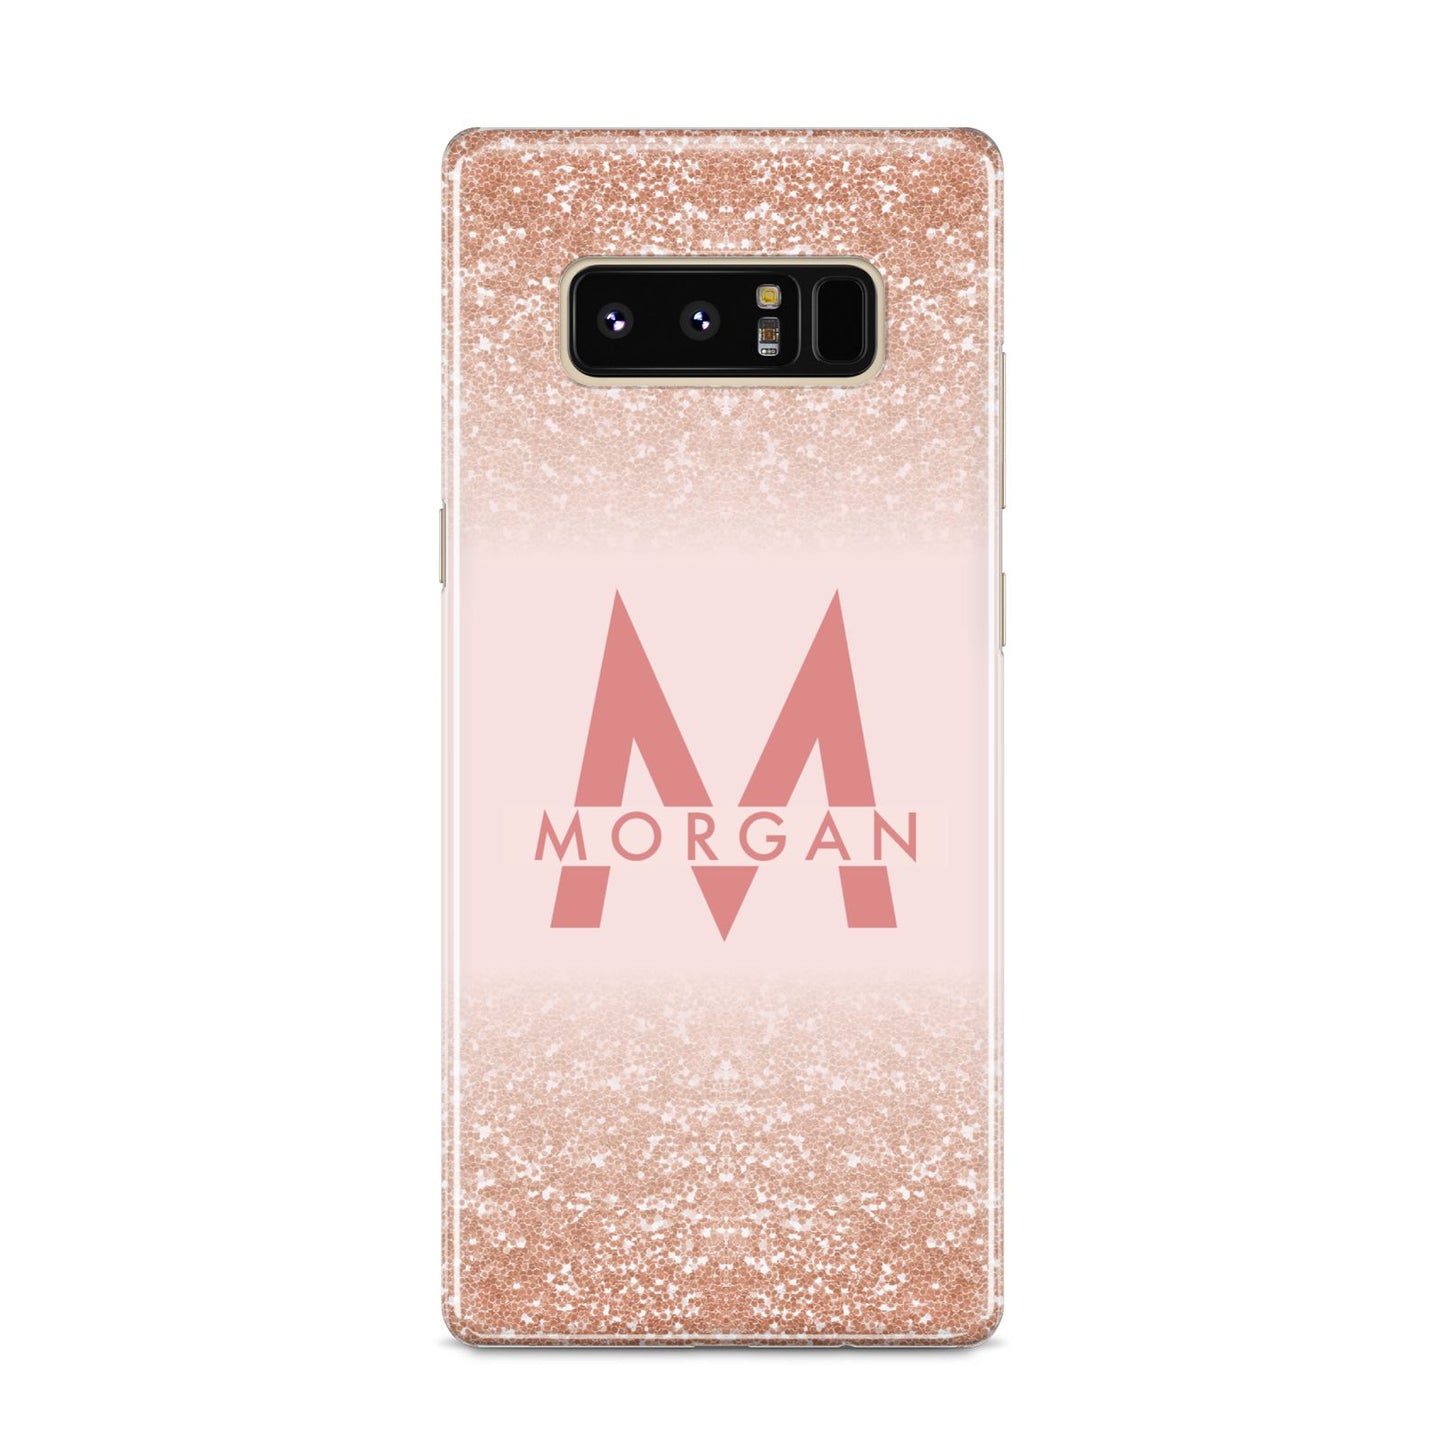 Personalised Printed Glitter Name Initials Samsung Galaxy S8 Case